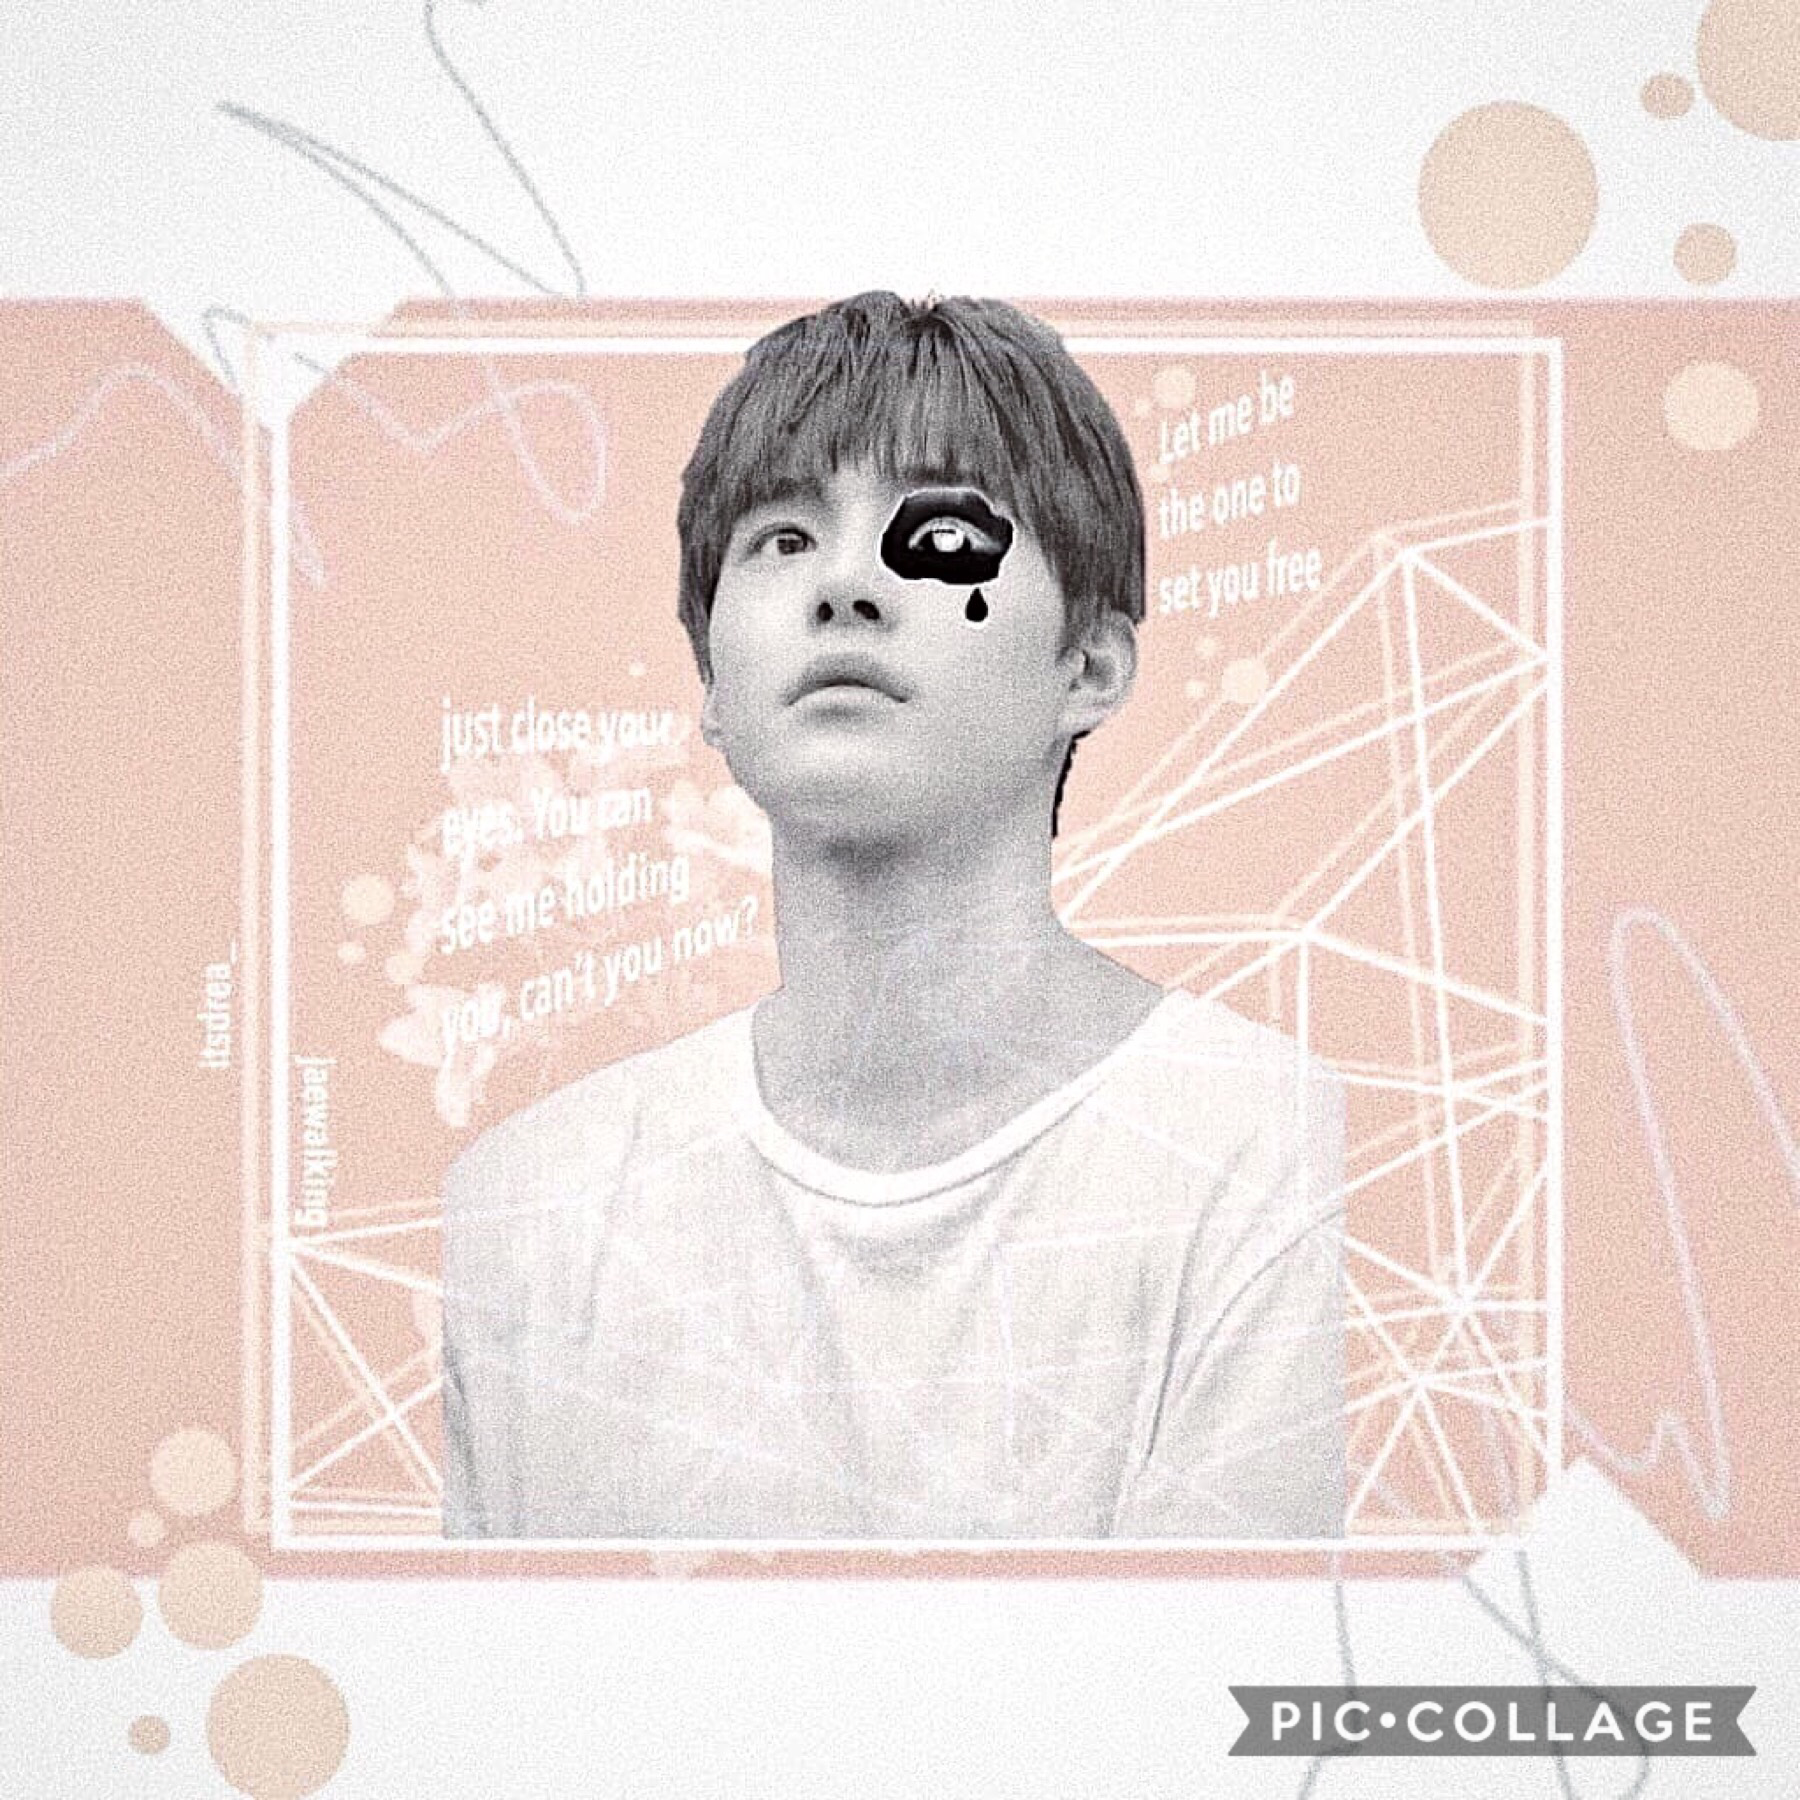 collab with....
@itsdrea_  
(〜^∇^)〜 i had so much fun making this with you (even tho i made ur beautiful masterpiece less beautiful)! ily and ur such an amazing talented person the deserves SO MUCH LOVEEE
•[continued in comments]•